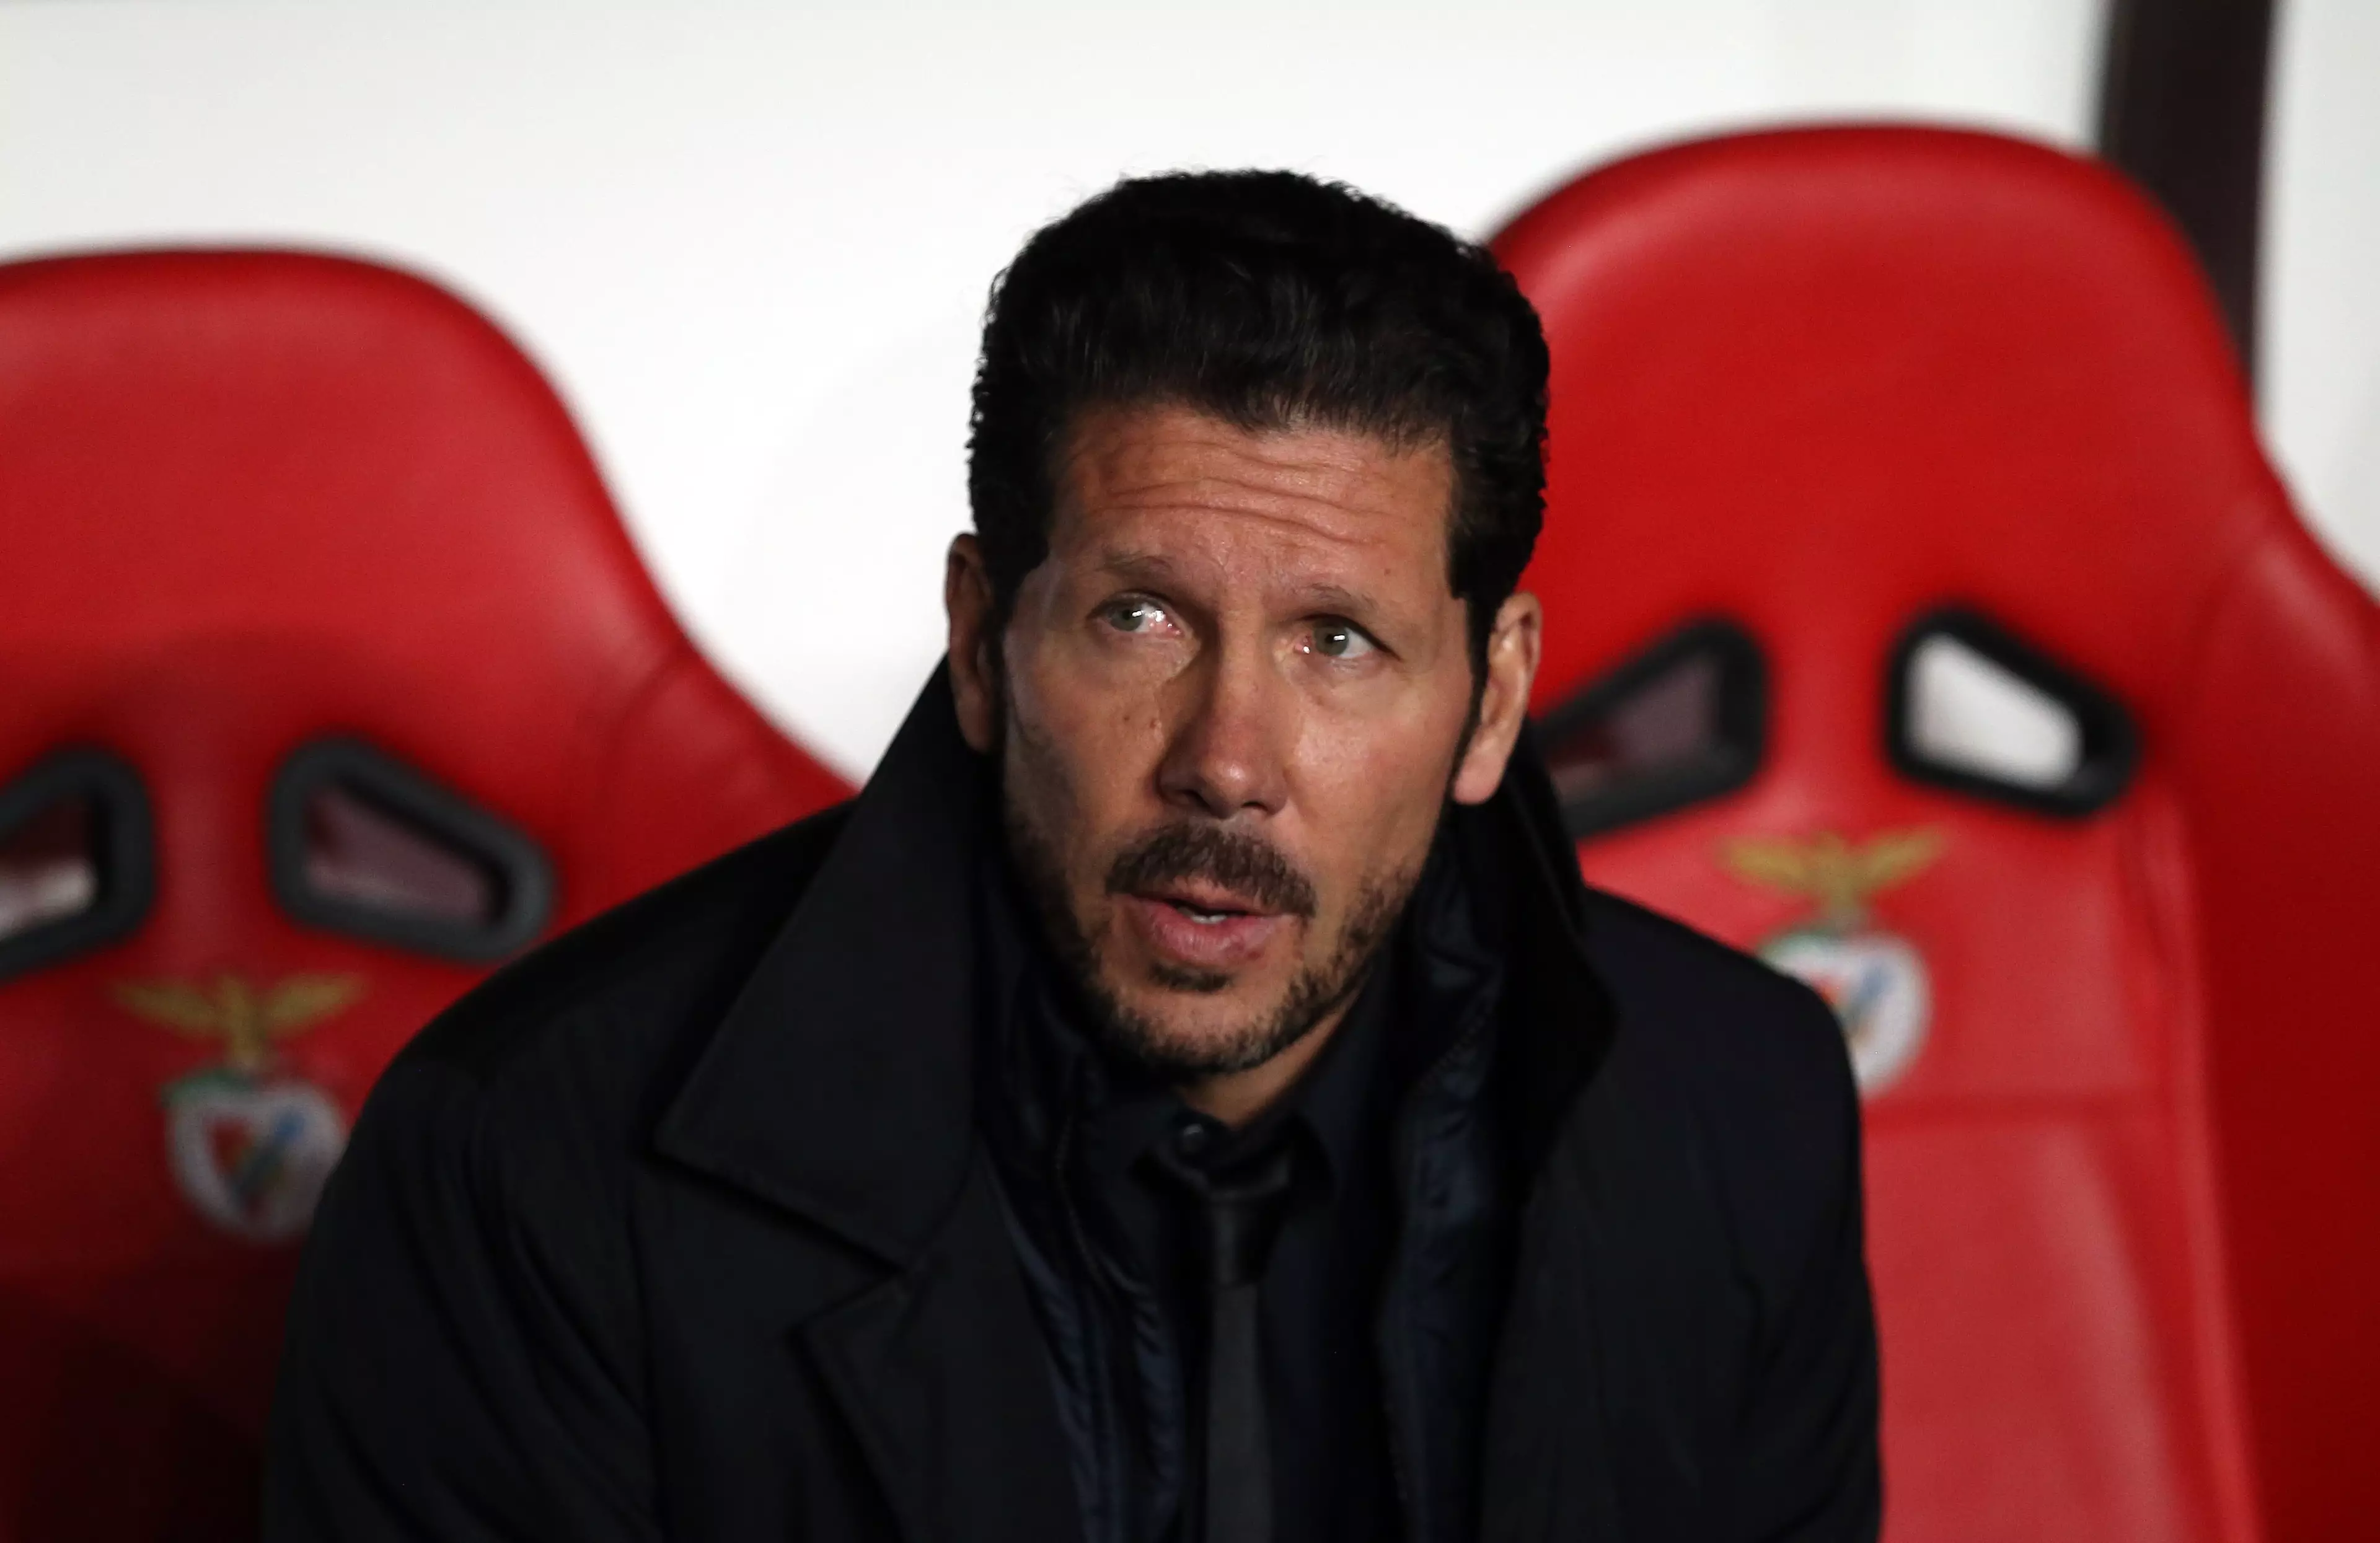 Simeone's time with Atleti has seen him become one of the world's best managers. Image: PA Images.